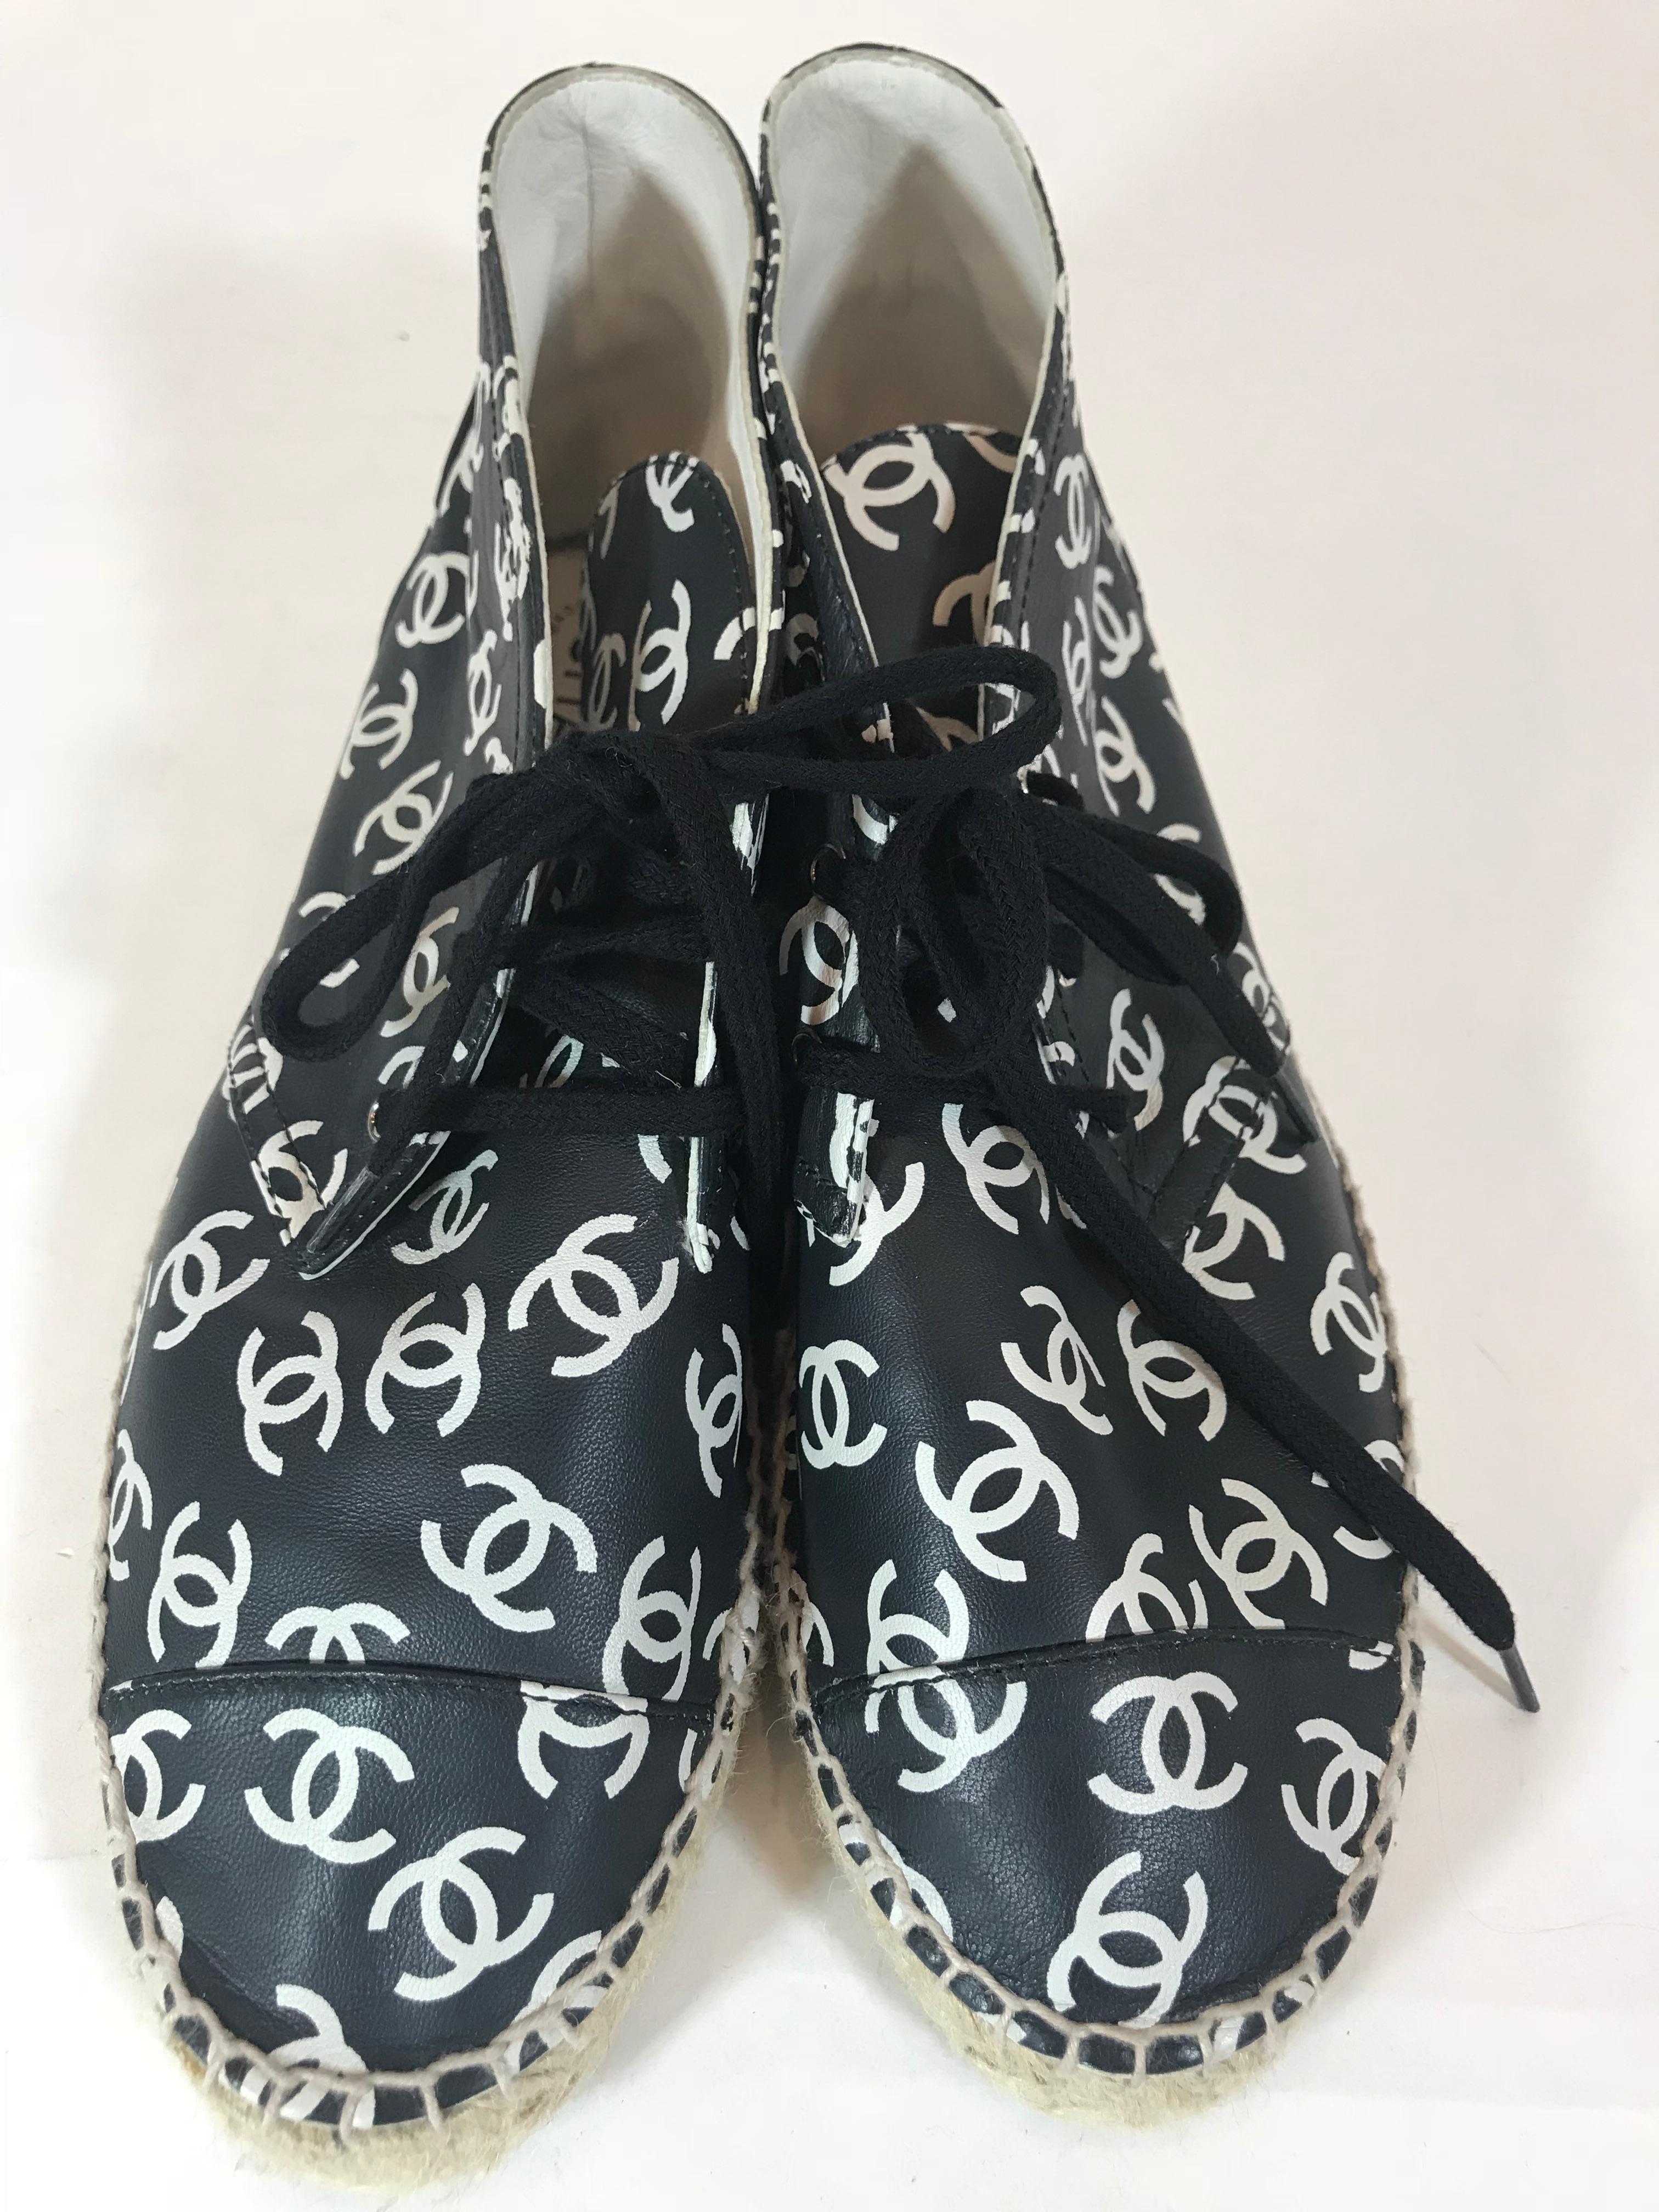 Chanel High-Top Espadrille Sneakers In New Condition For Sale In Roslyn, NY